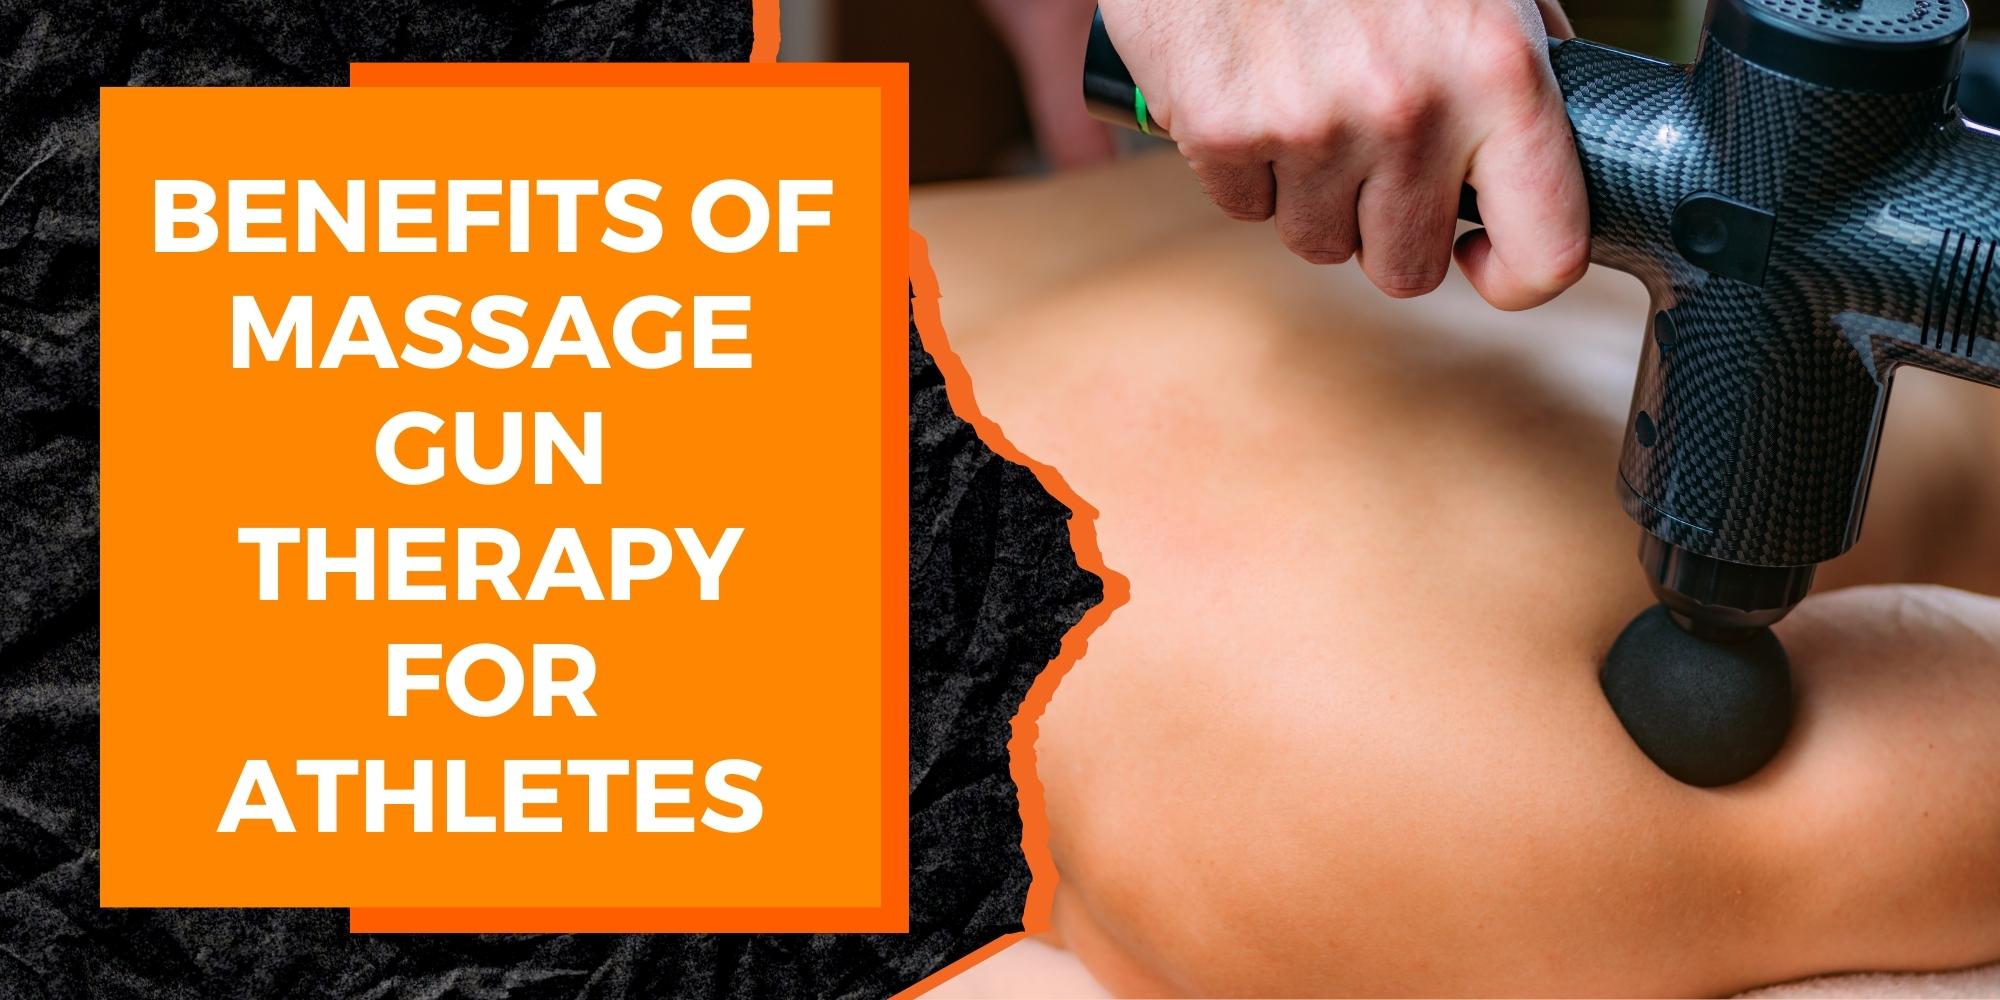 Benefits of Massage Gun Therapy for Athletes